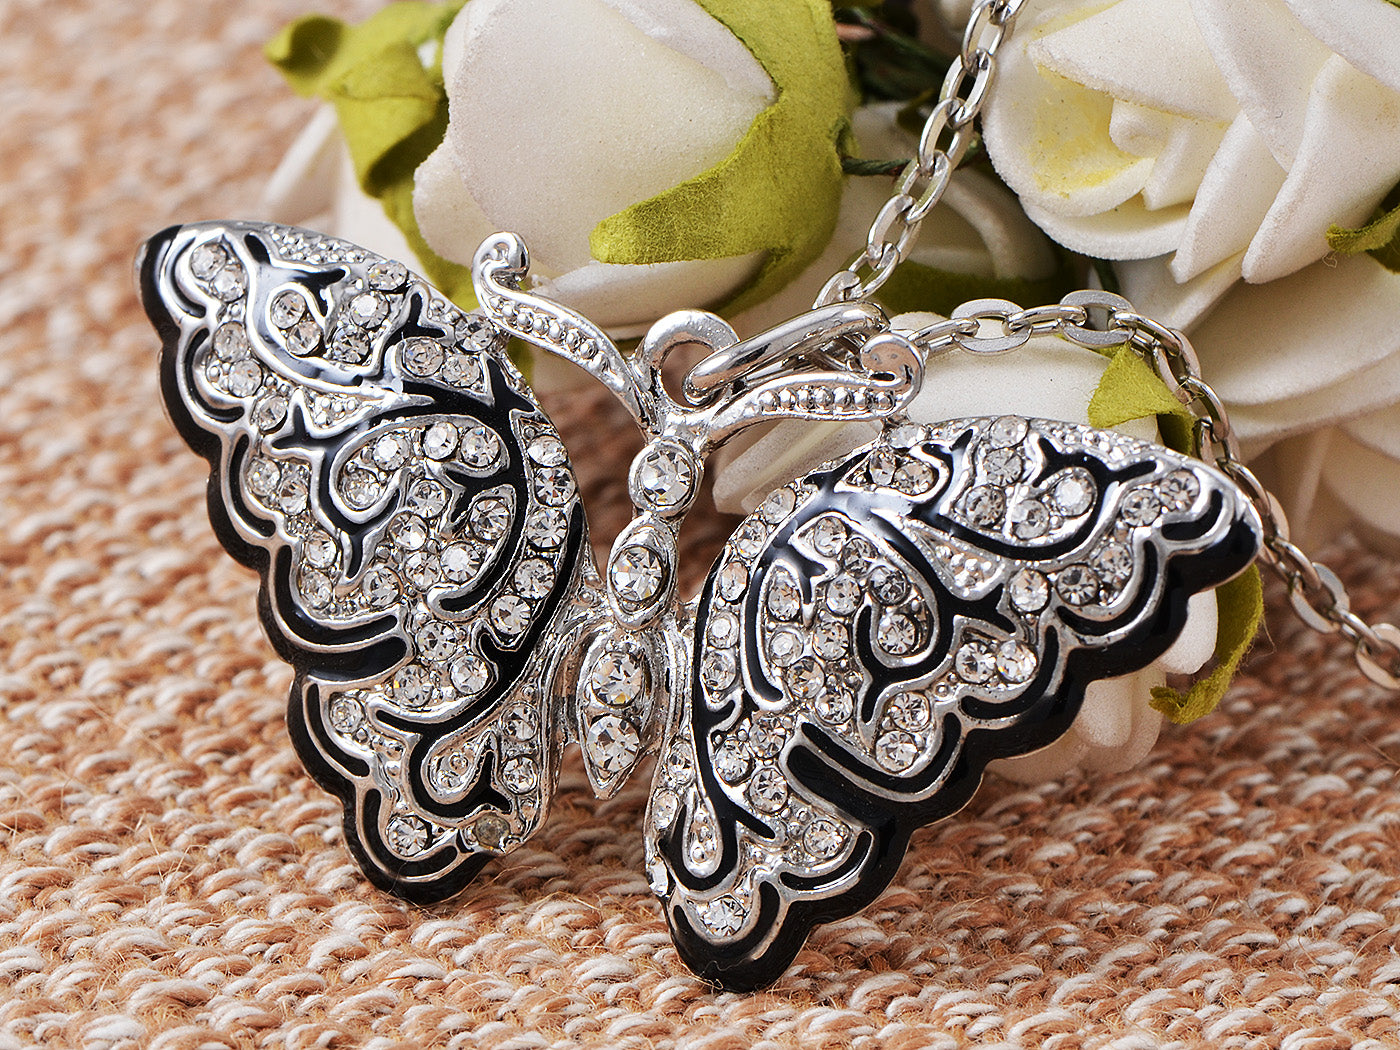 Immaculately Carved Silver D Black Enamel Art Deco Butterfly Necklace Pendant